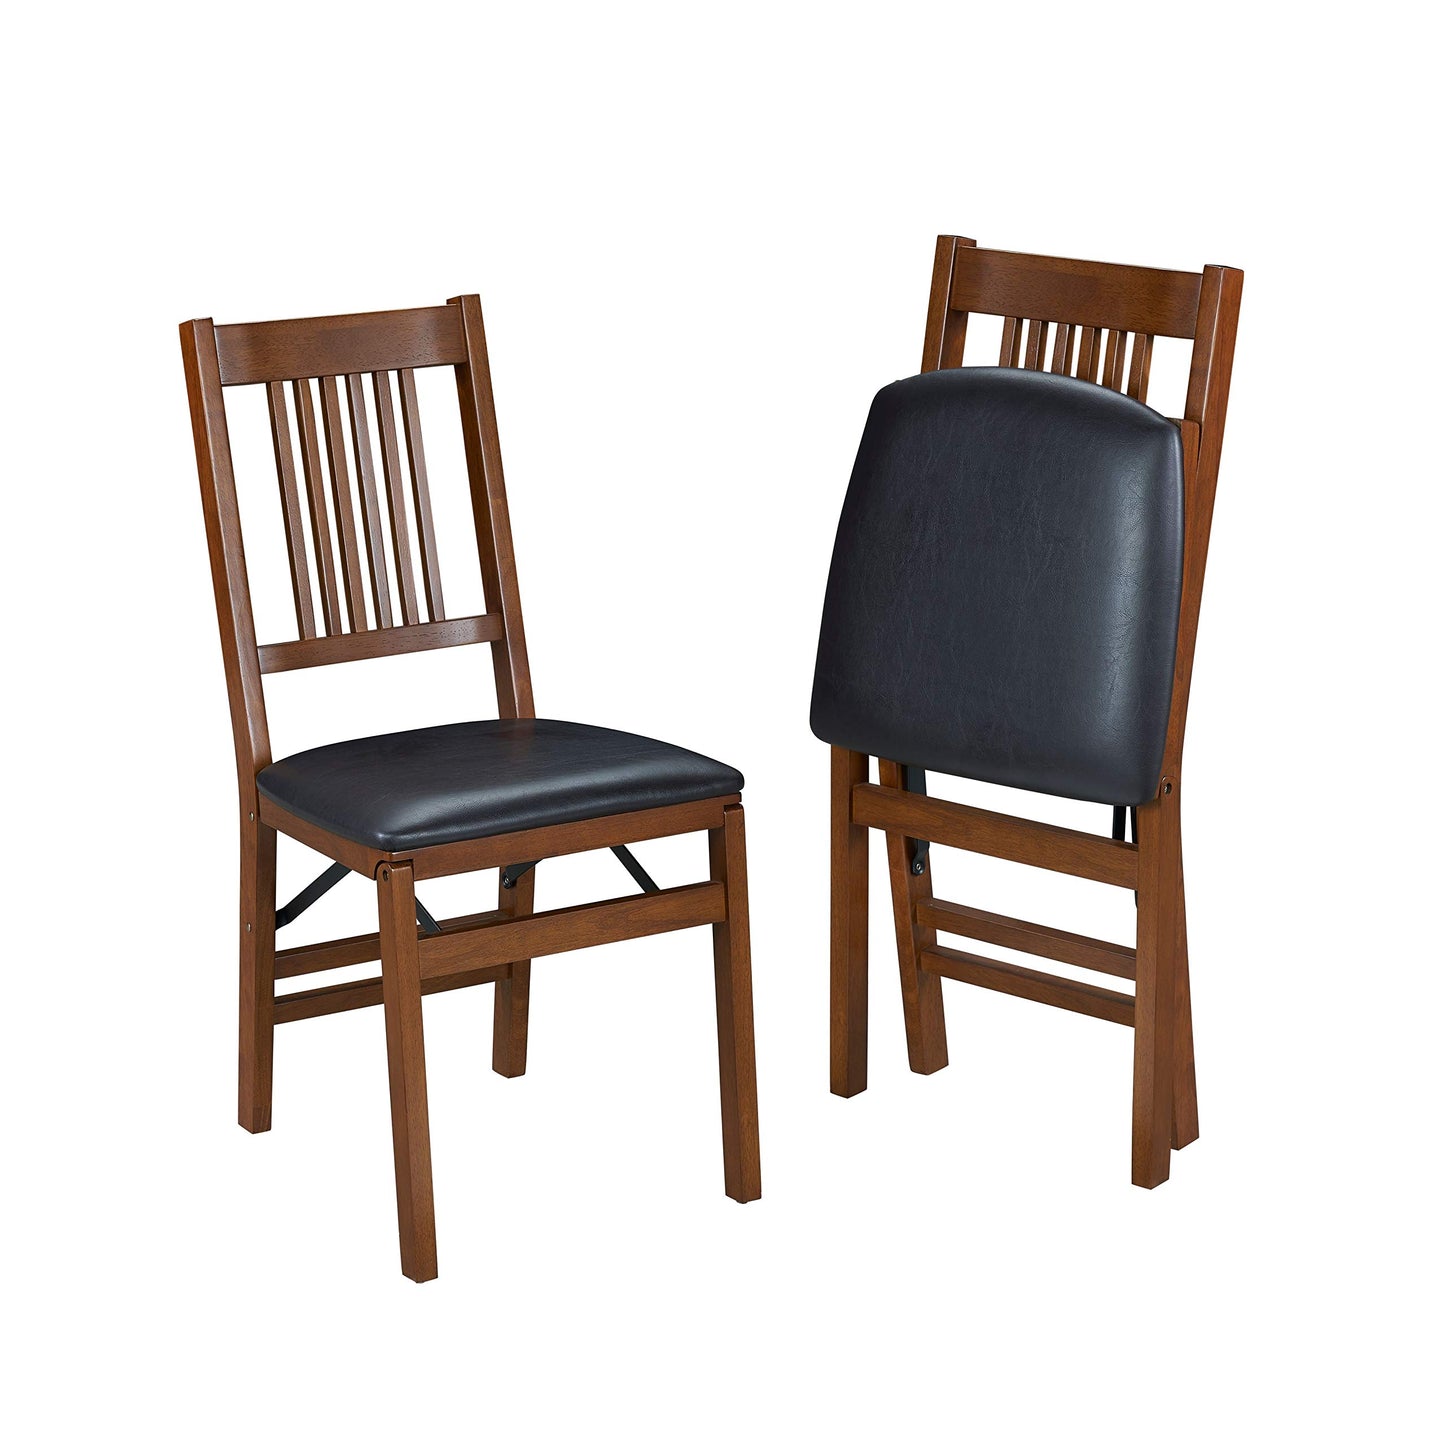 Meco STAKMORE True Mission Folding Chair Fruitwood Finish, Set of 2